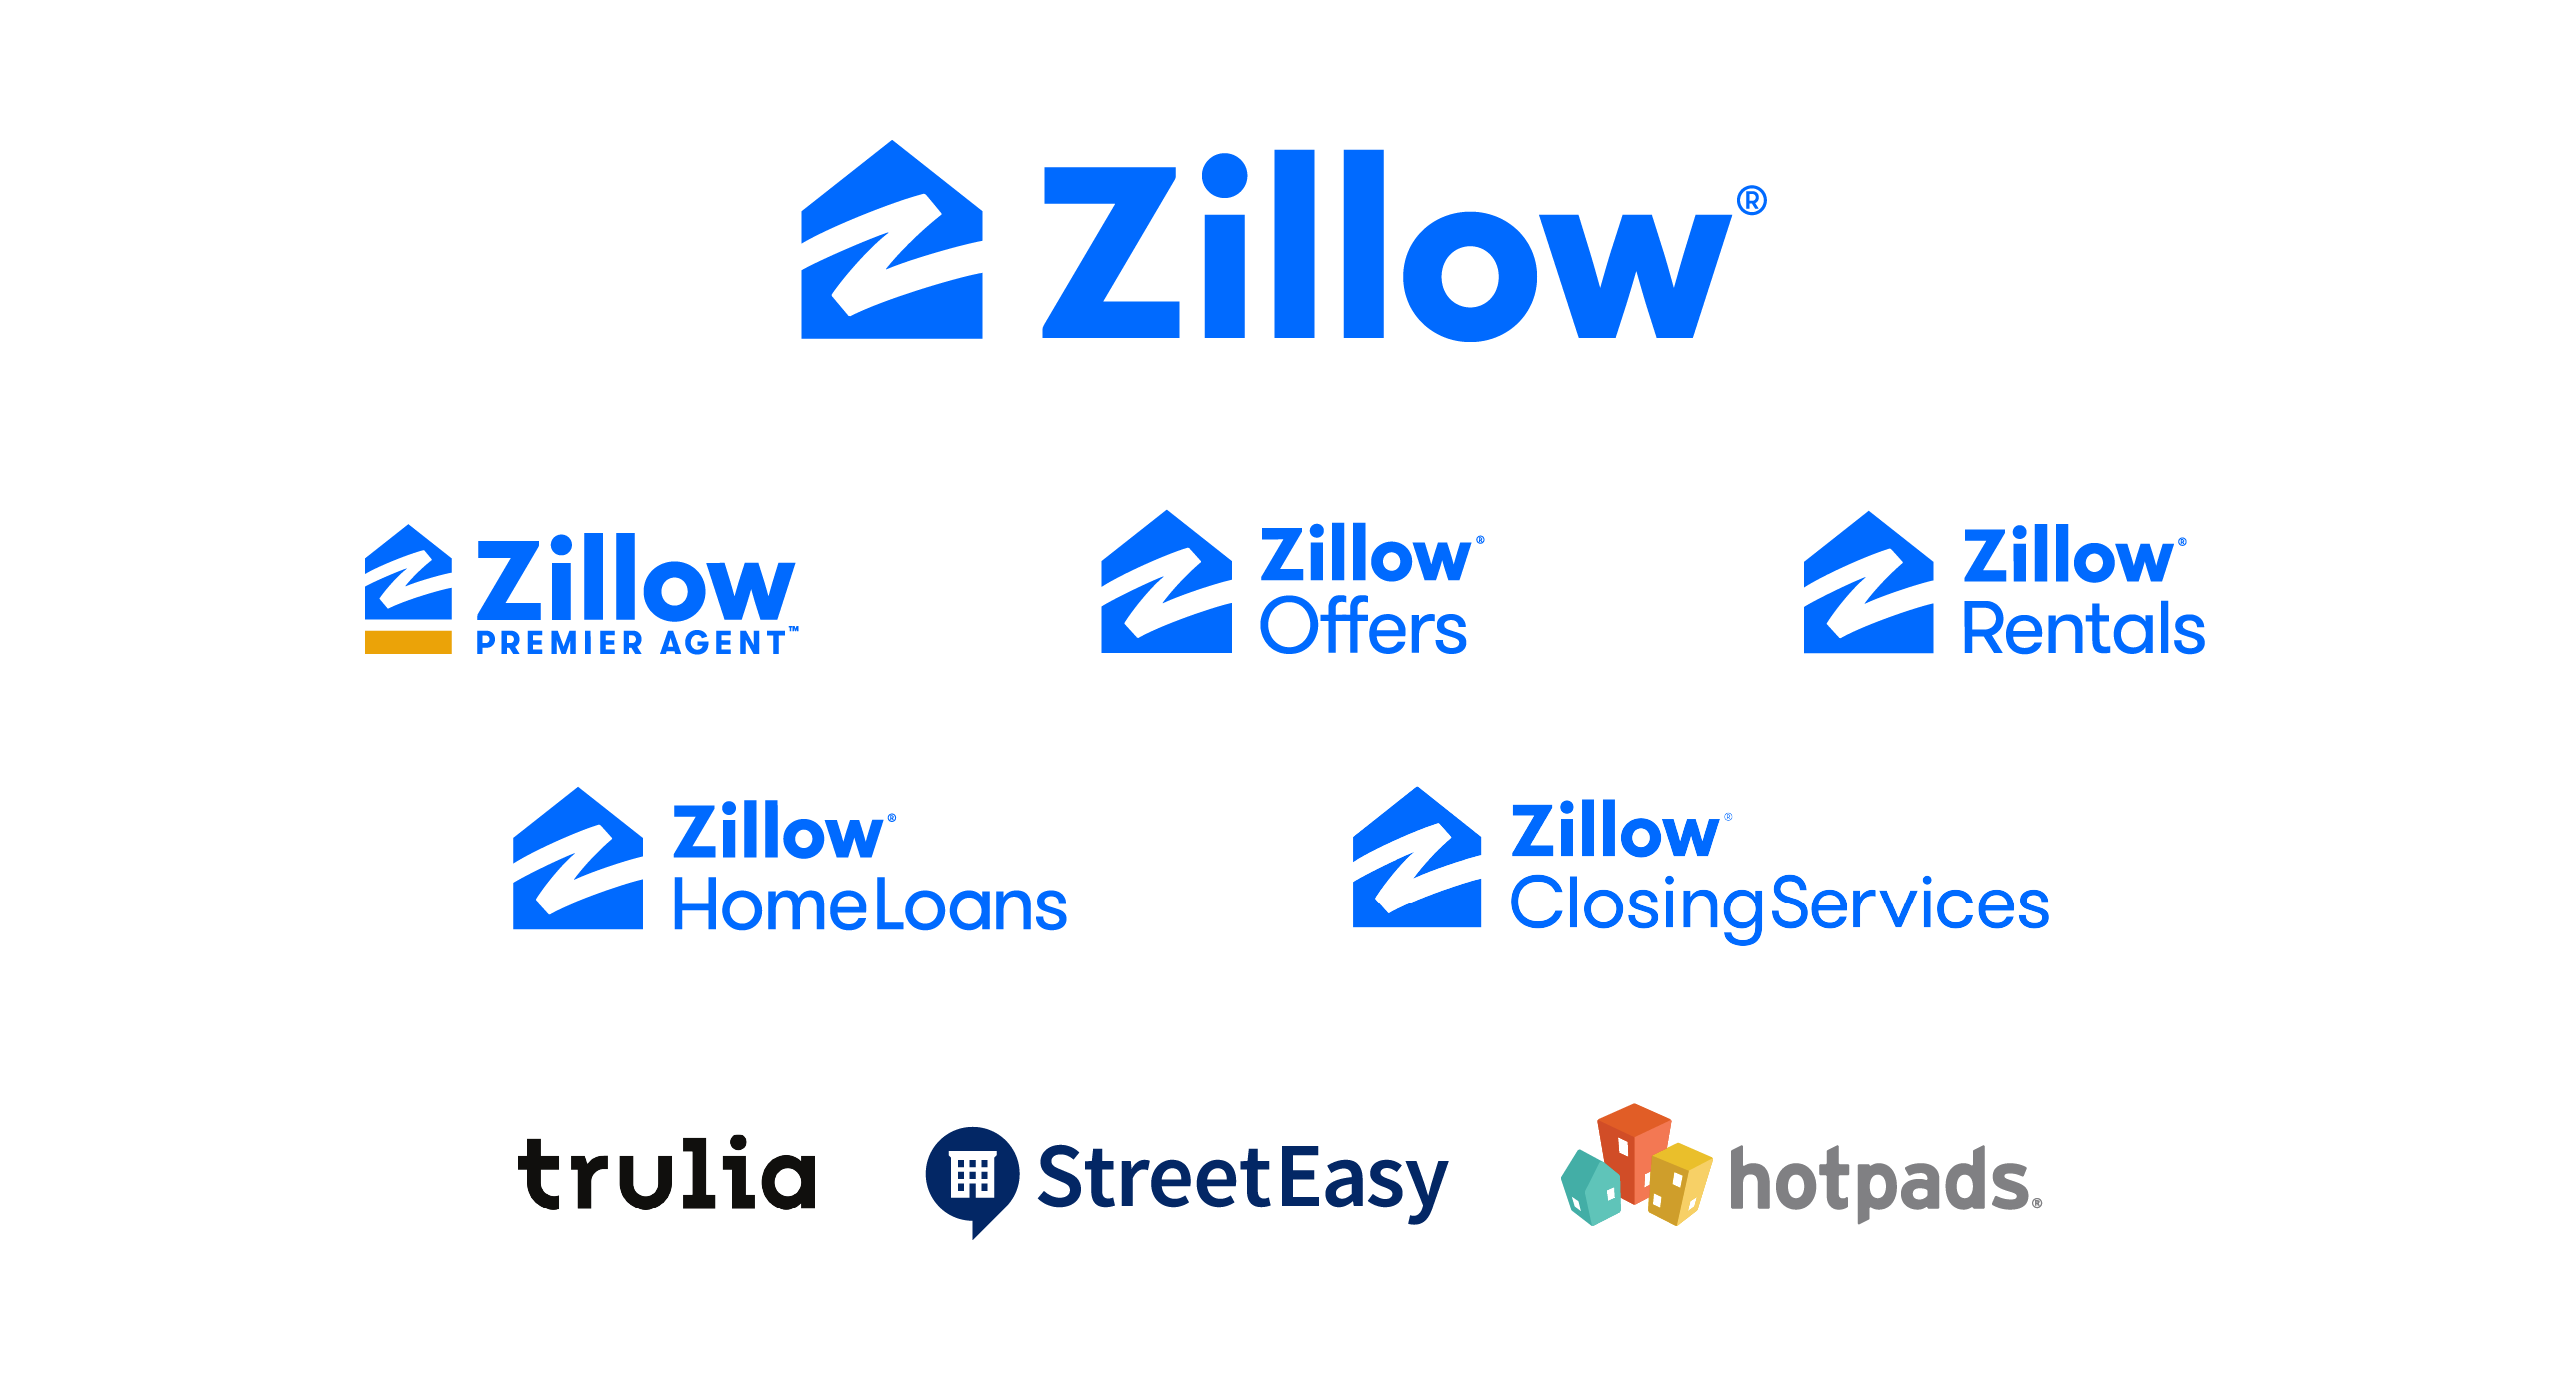 Zillow fights back against Canadian critics - REM - Real Estate Magazine